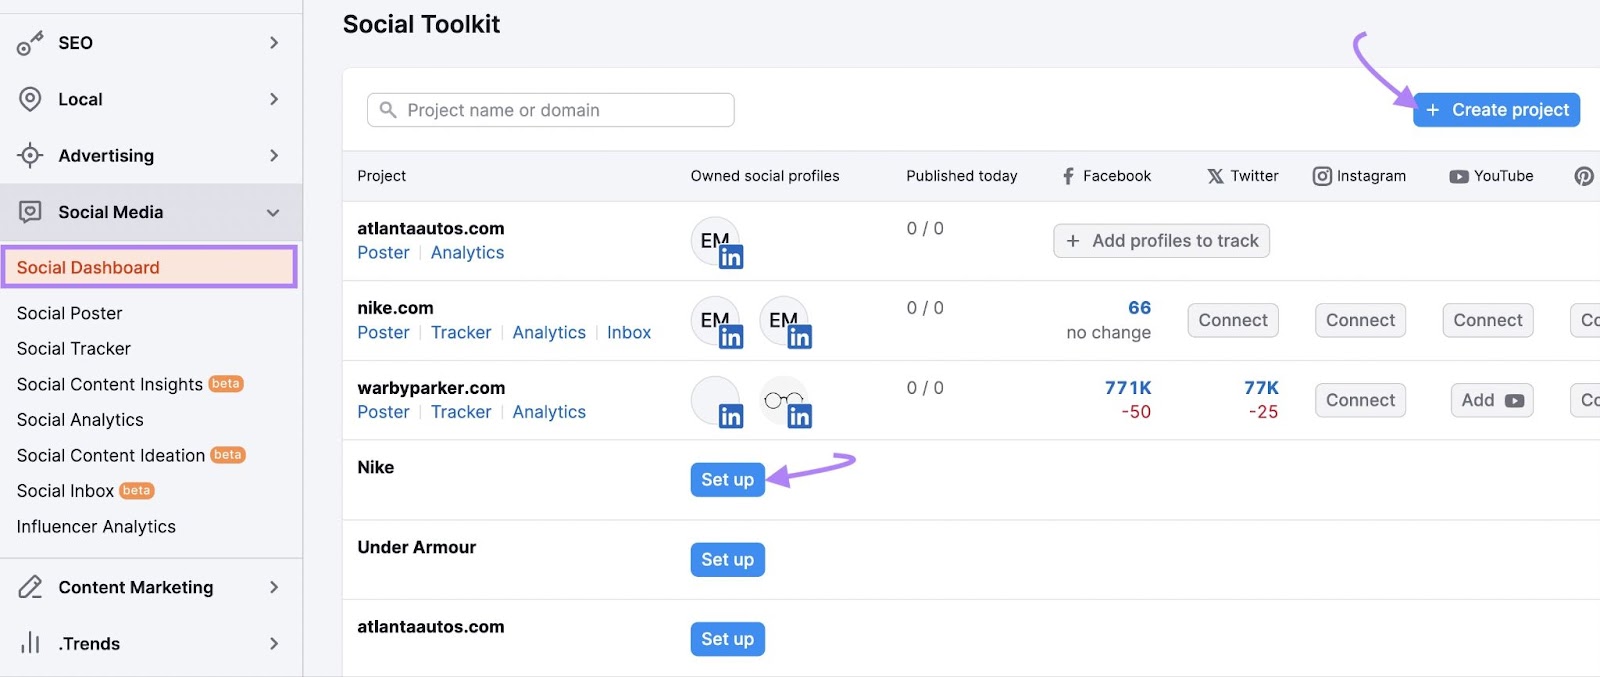 Social dashboard tool by Semrush with 3 projects to set up and create project highlighted